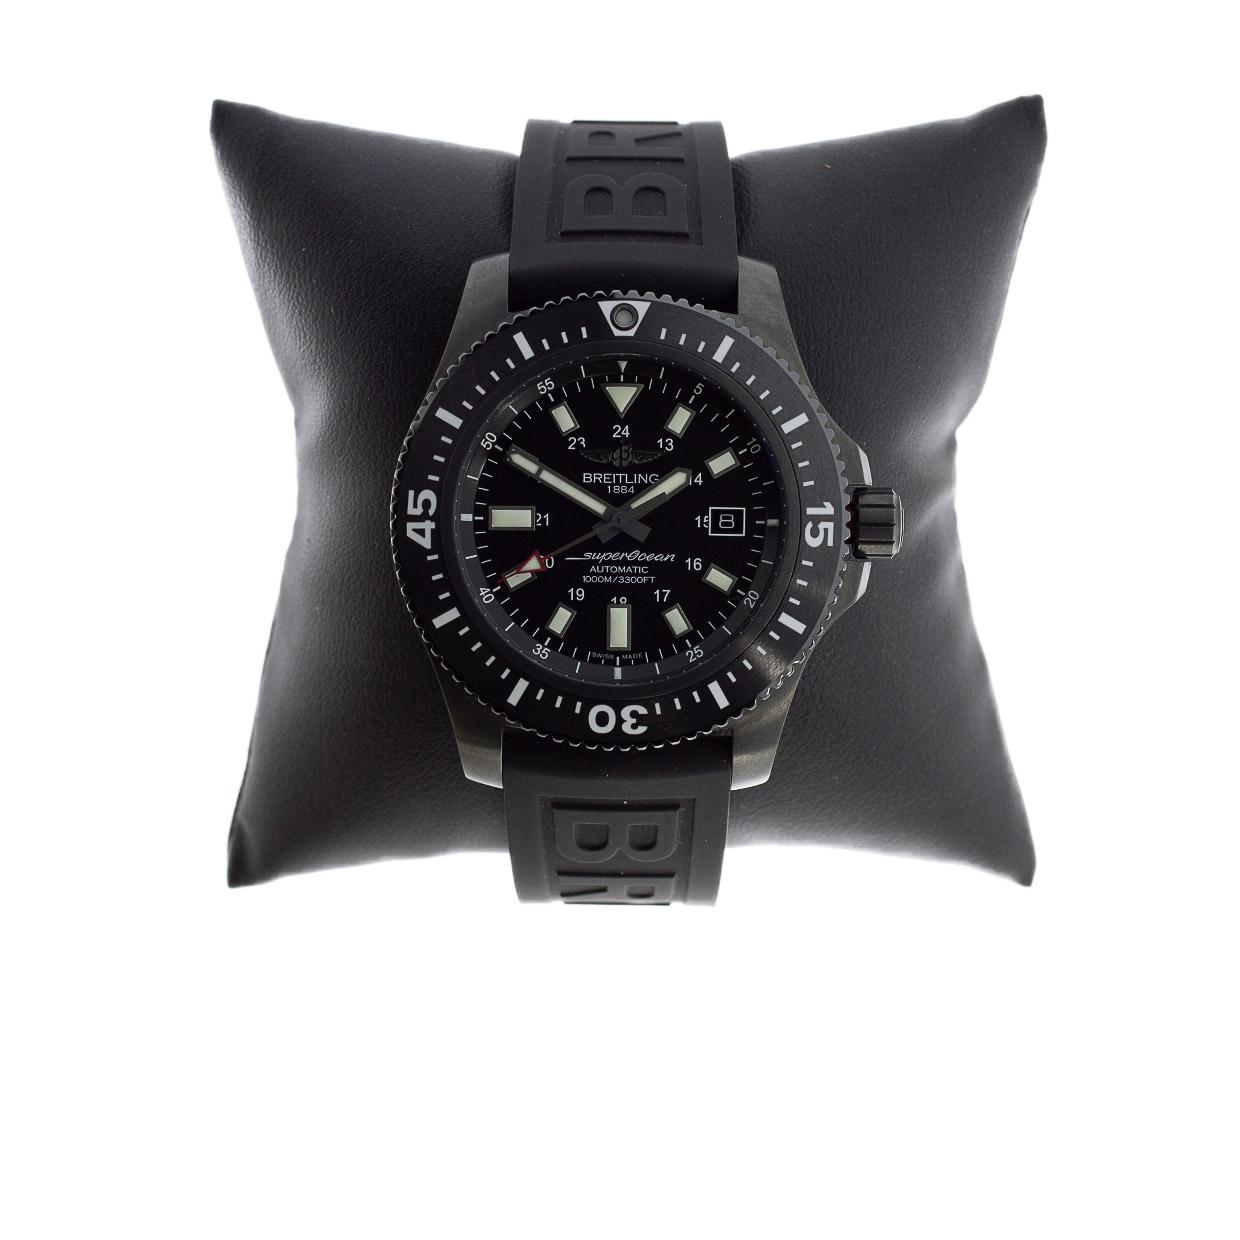 Product Details:
Condition: Pre Owned
Brand: Breitling
Collection: Superocean
Case Material: Stainless Steel
Gender: Mens
MPN: M1739313/BE92
Movement: Mechanical Automatic
Face Color: Black
Band Type: 2pc Strp
Case Size: 44
Style: